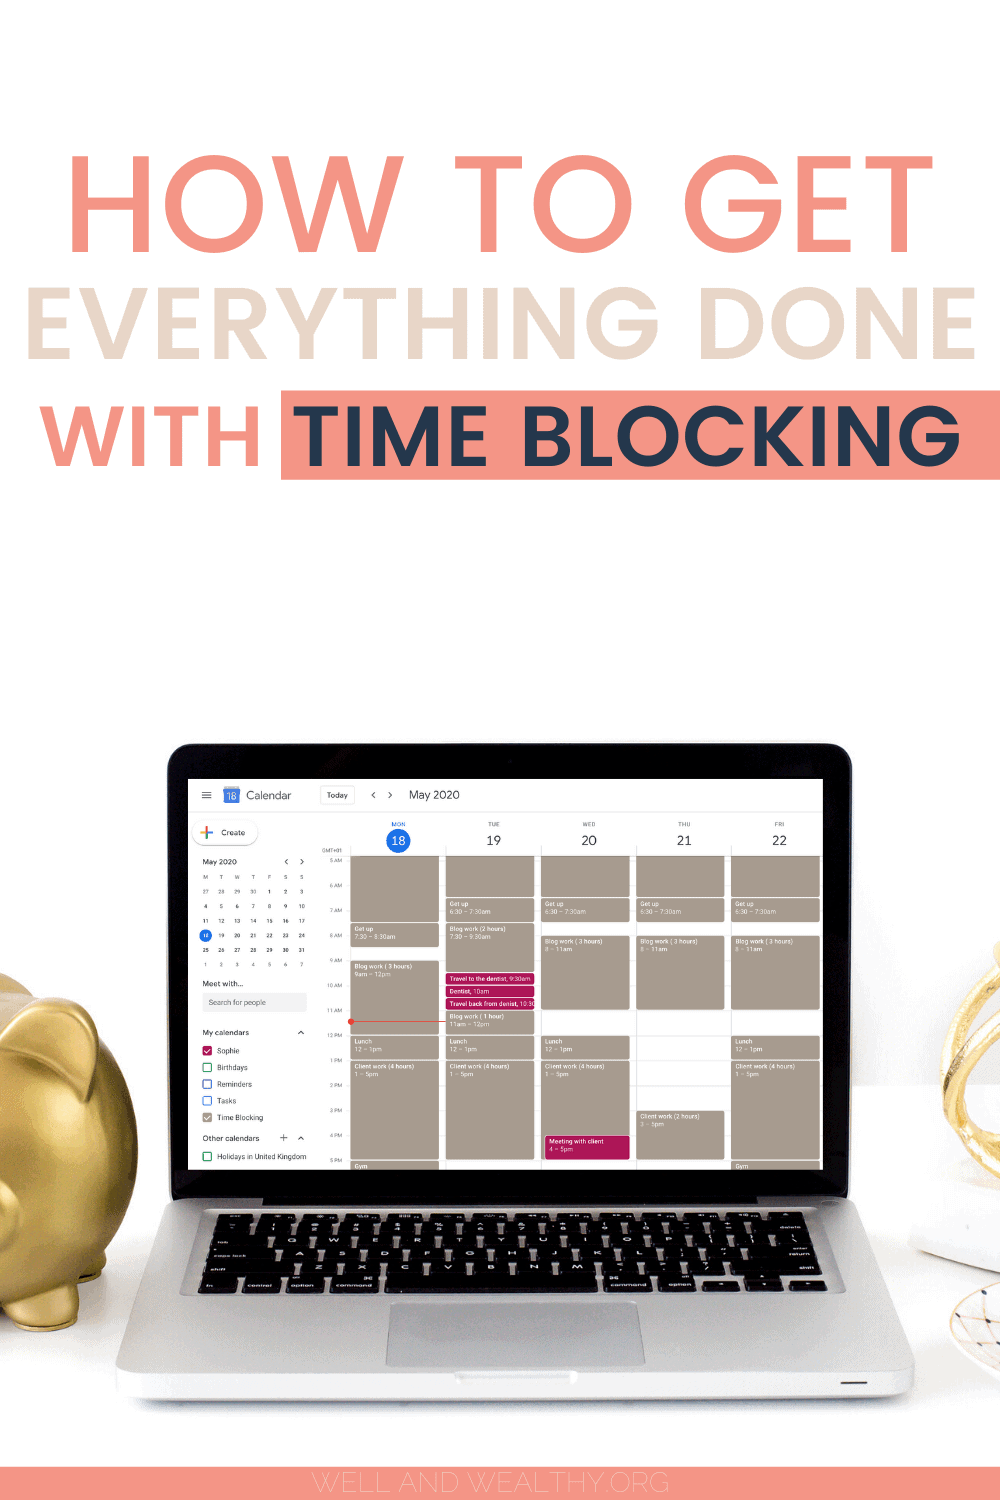 Ready for the ULTIMATE TUTORIAL on time blocking Google calendar? So you can get more done in less time WITHOUT overwhelm, then read this post!It will teach you how to time block and how to start time blocking, as well as calendar blocking google, how to set up a weekly time block schedule, how to start a time batching schedule, a time blocking schedule calendar, a time blocking schedule example and so much more! If you want to learn how to be productive at home time management, how to be productive at work tips, how to be productive everyday, and how to be productive and organized then this post is for you because it will teach you how to get more done in a day, at work or at home! #timeblocking #googlecalendar #timemanagementtips #productivity